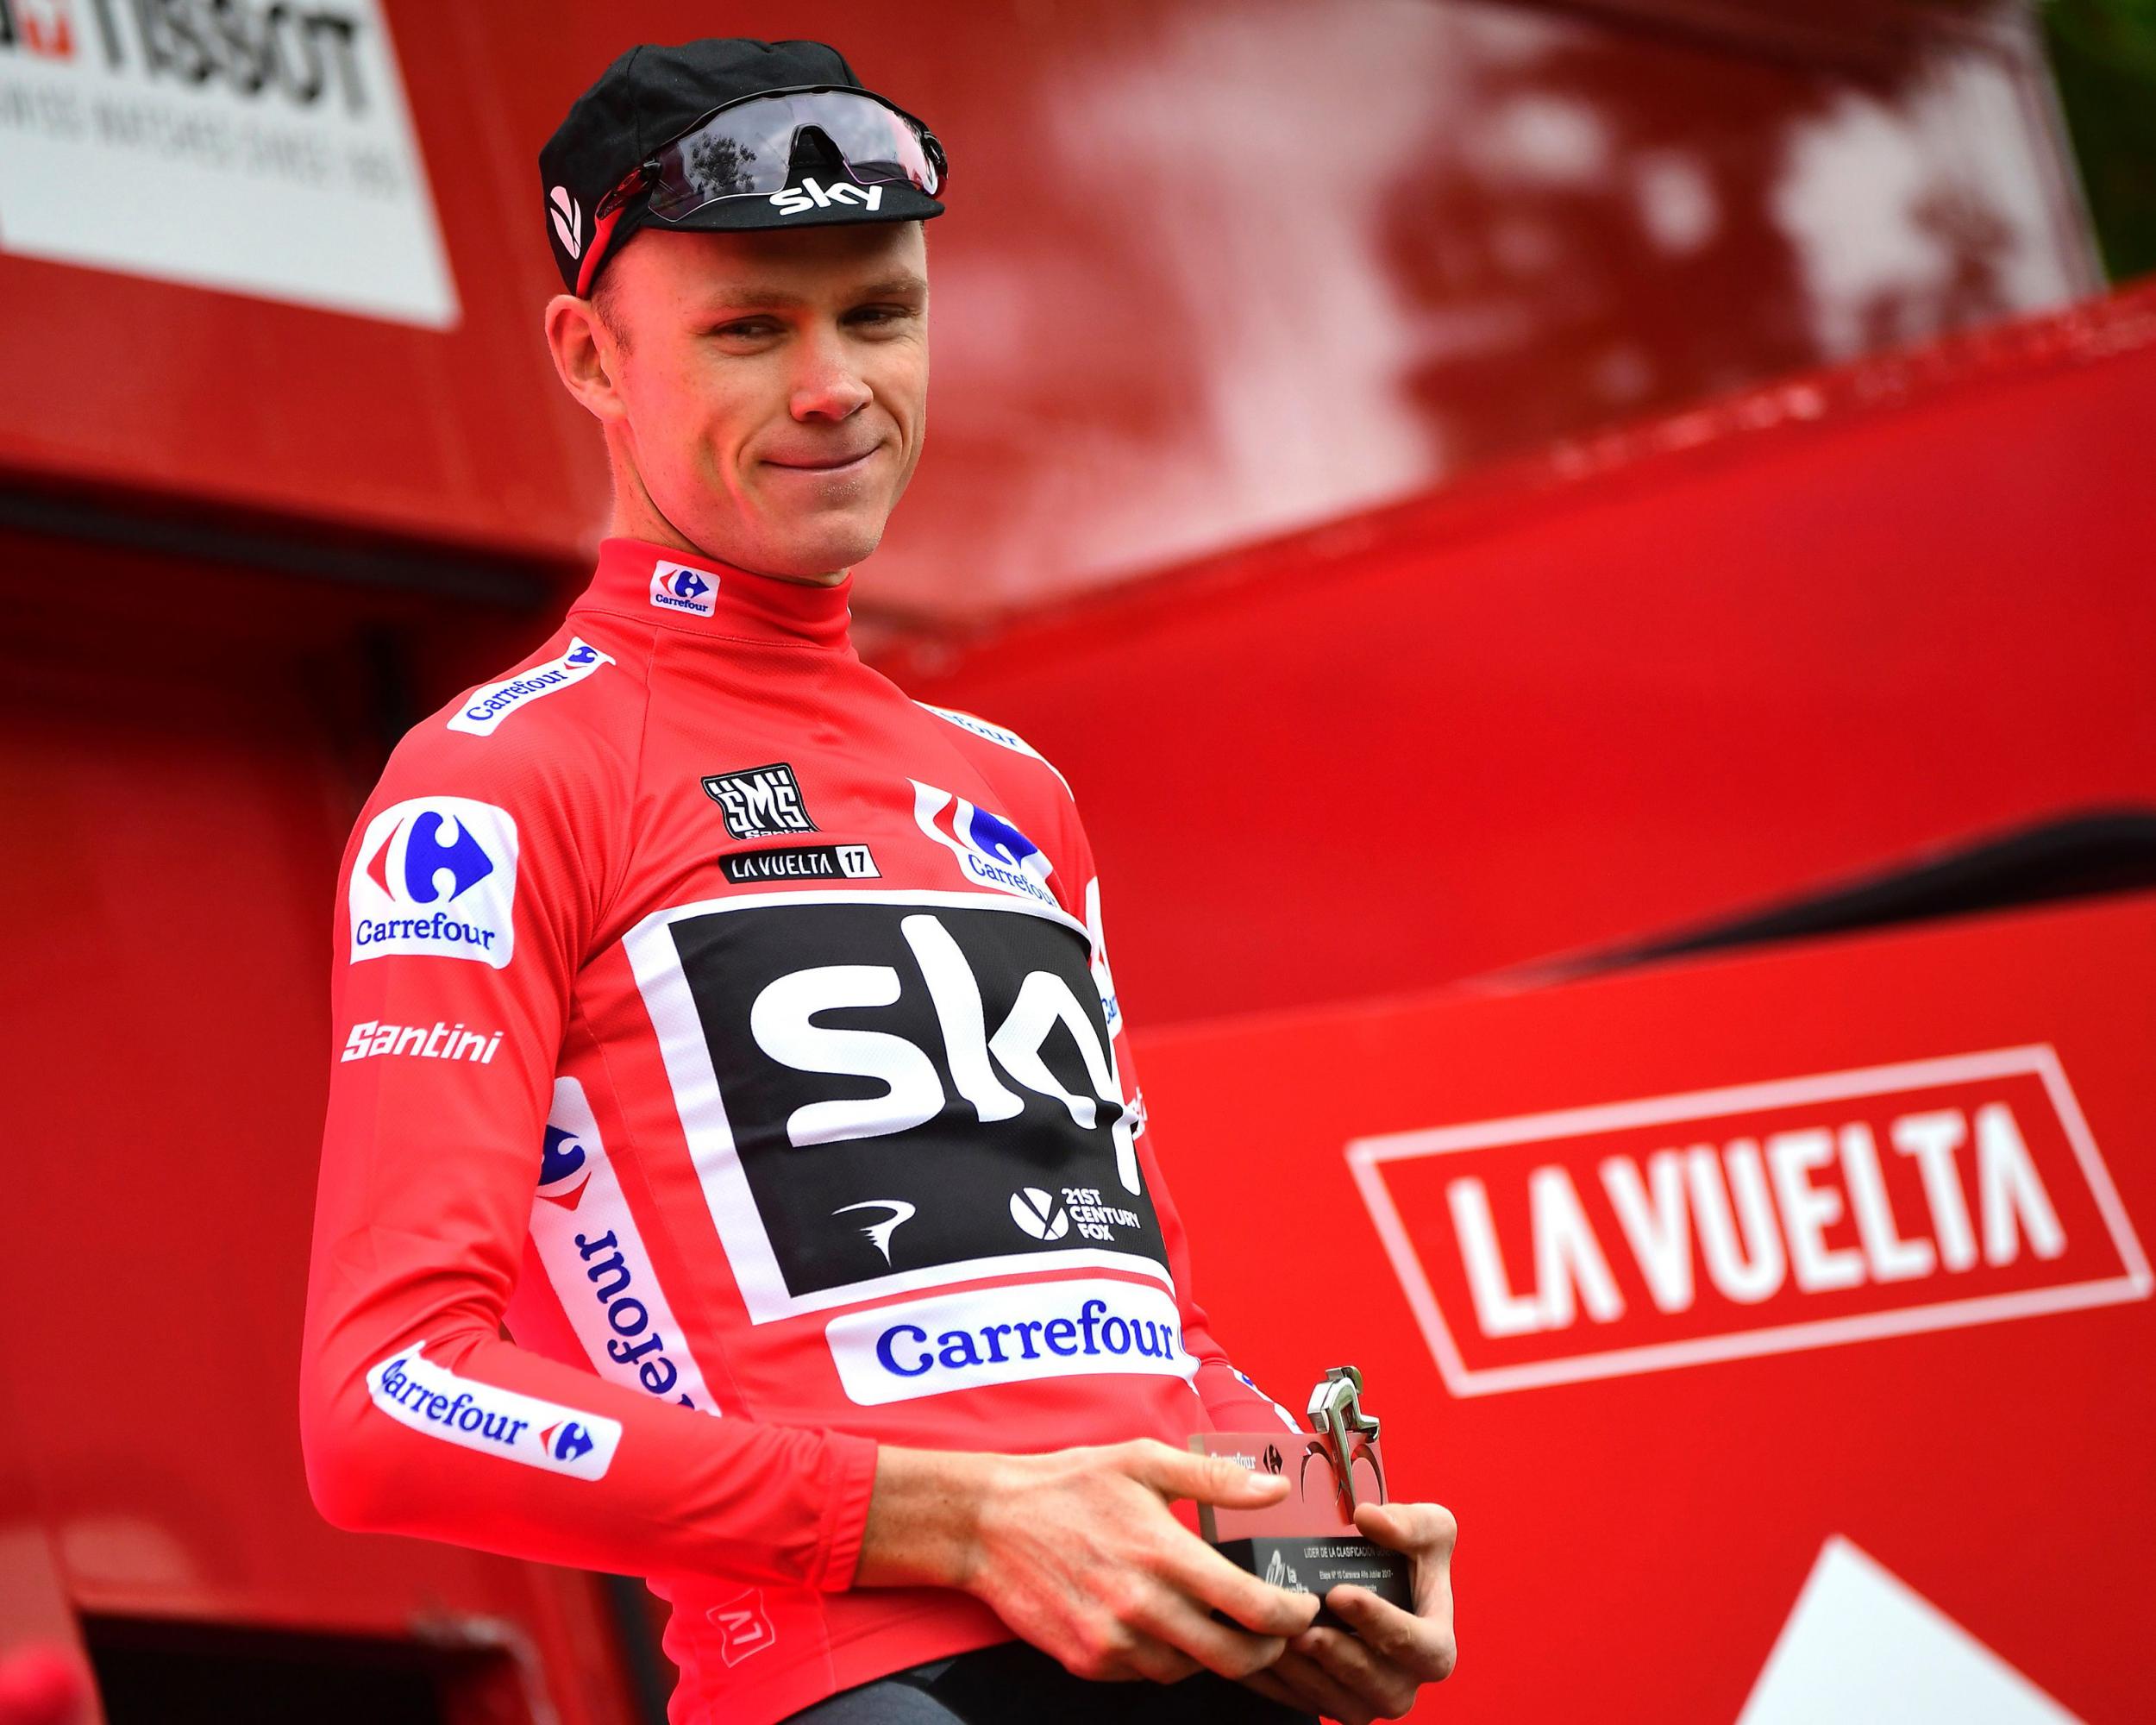 Froome retains the red jersey